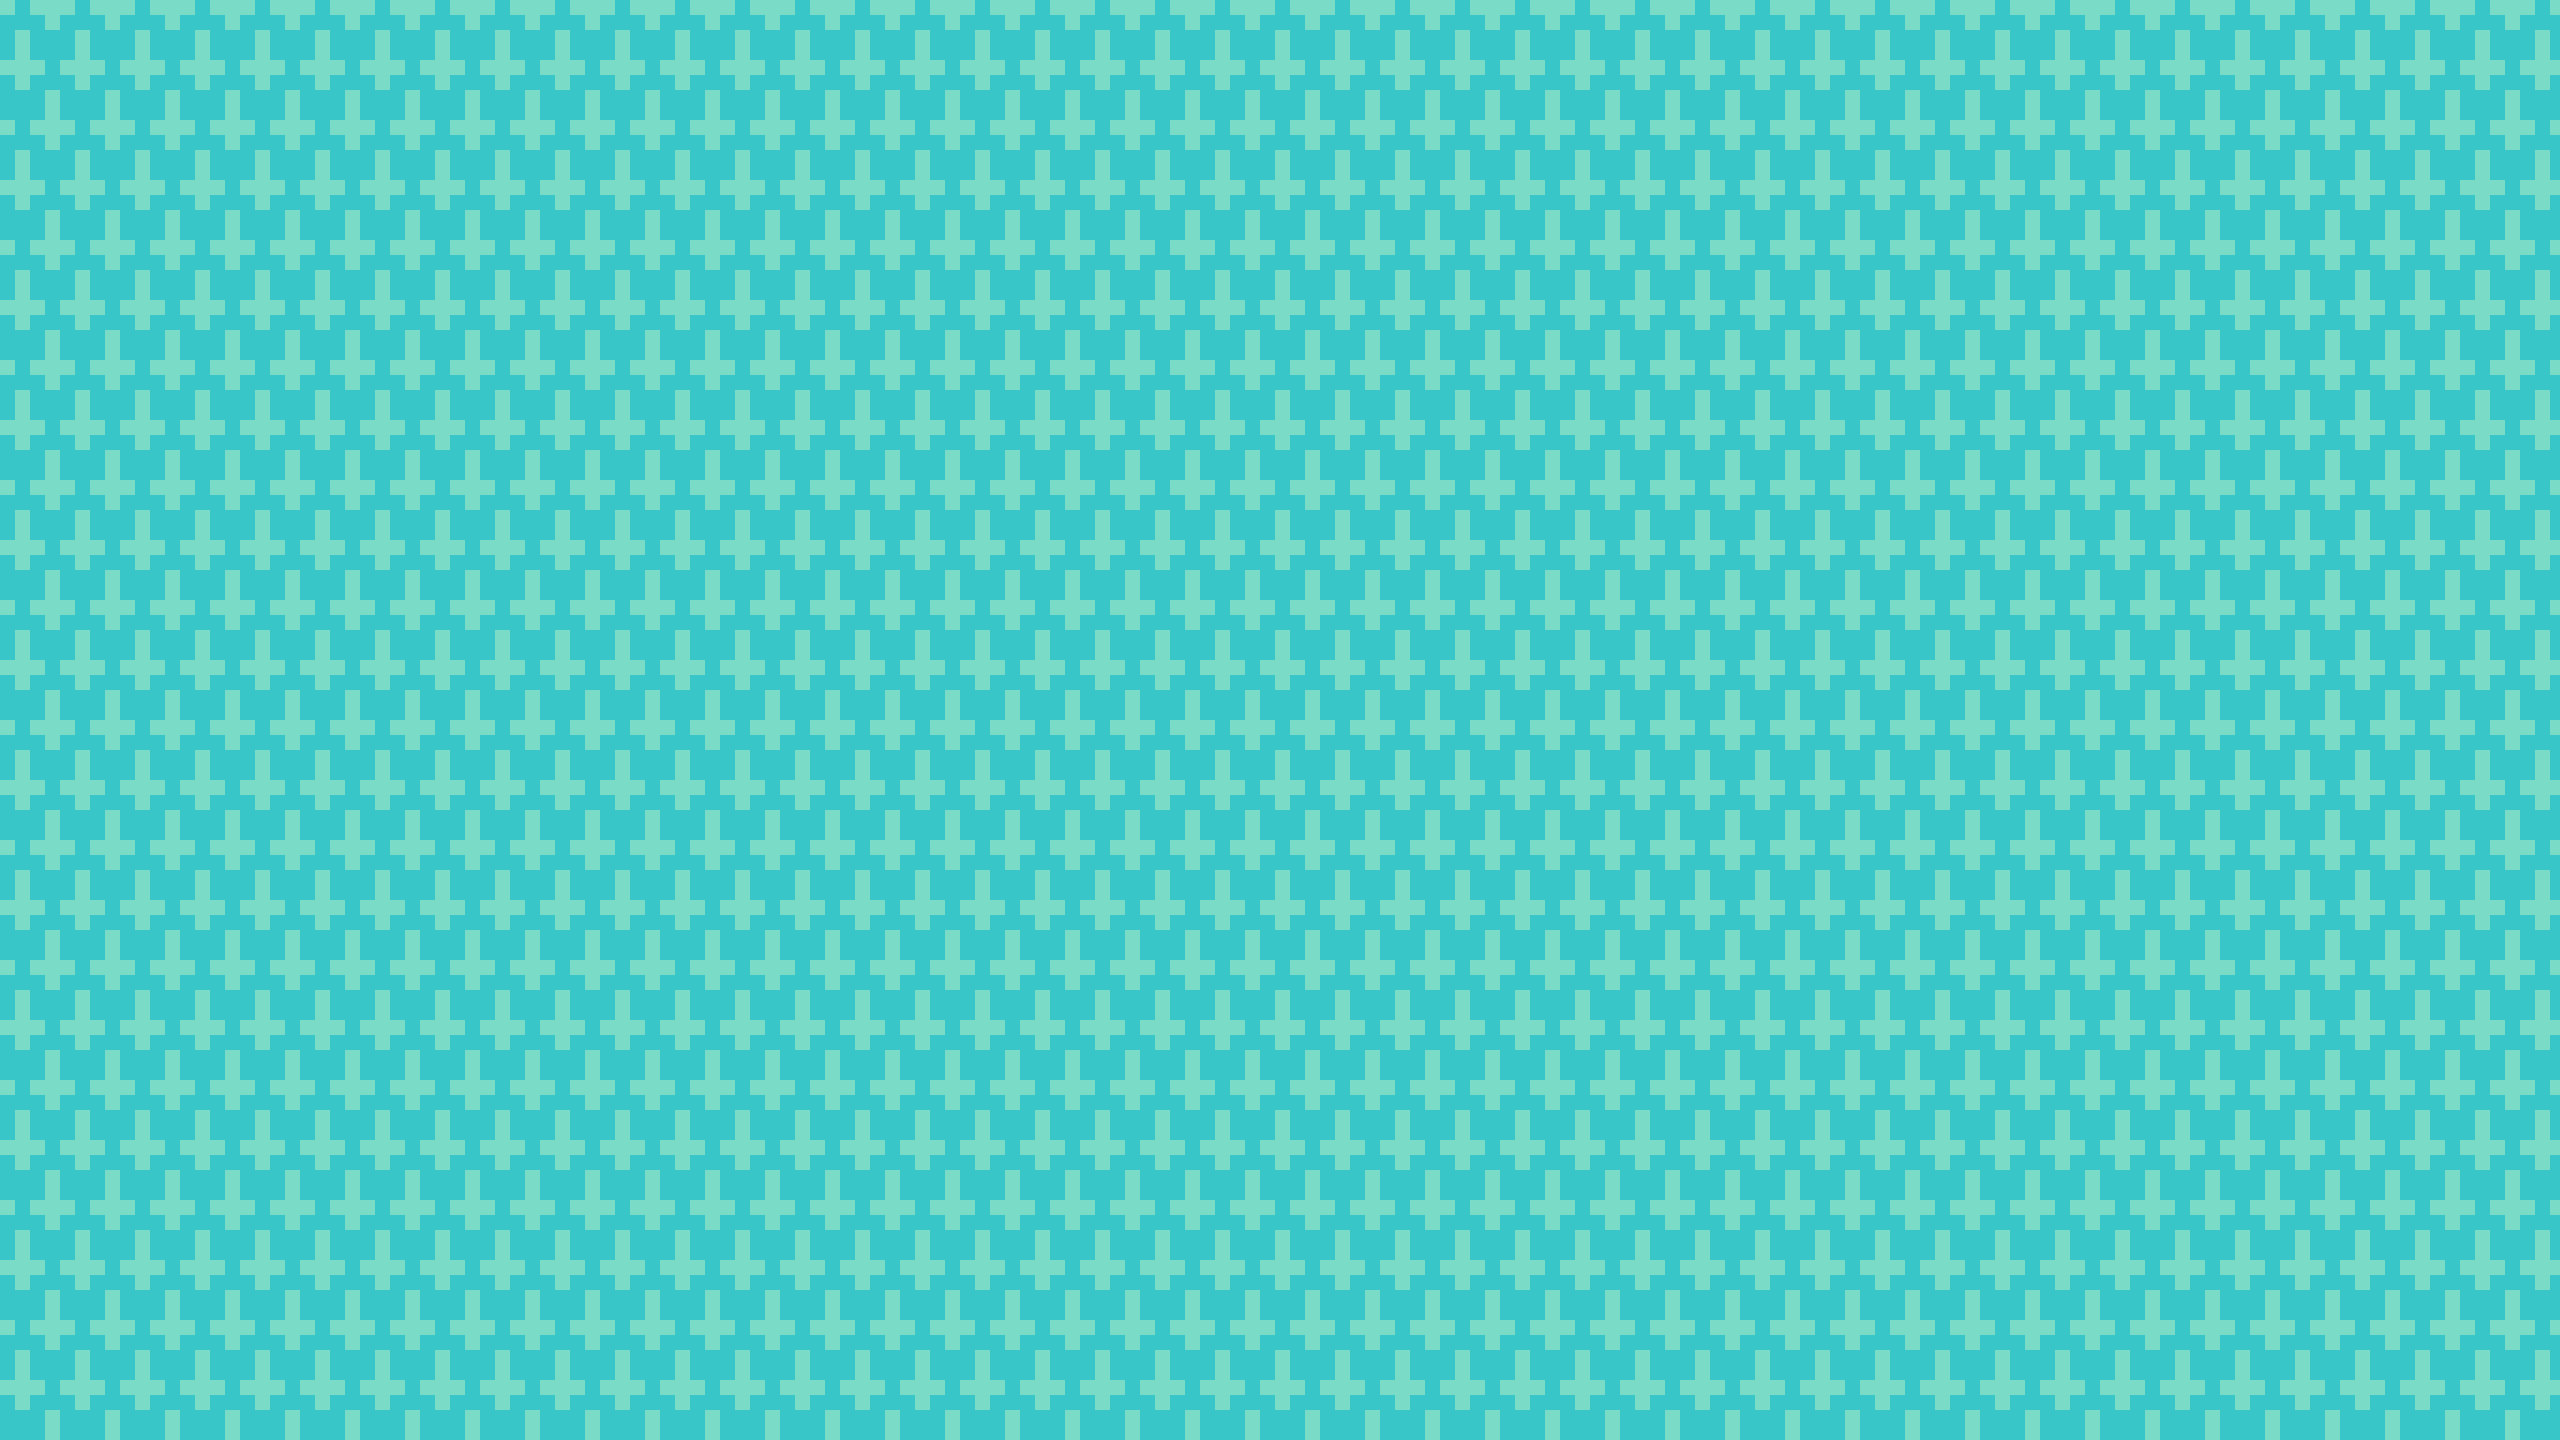 This Teal Crosses Desktop Wallpaper Is Easy Just Save The